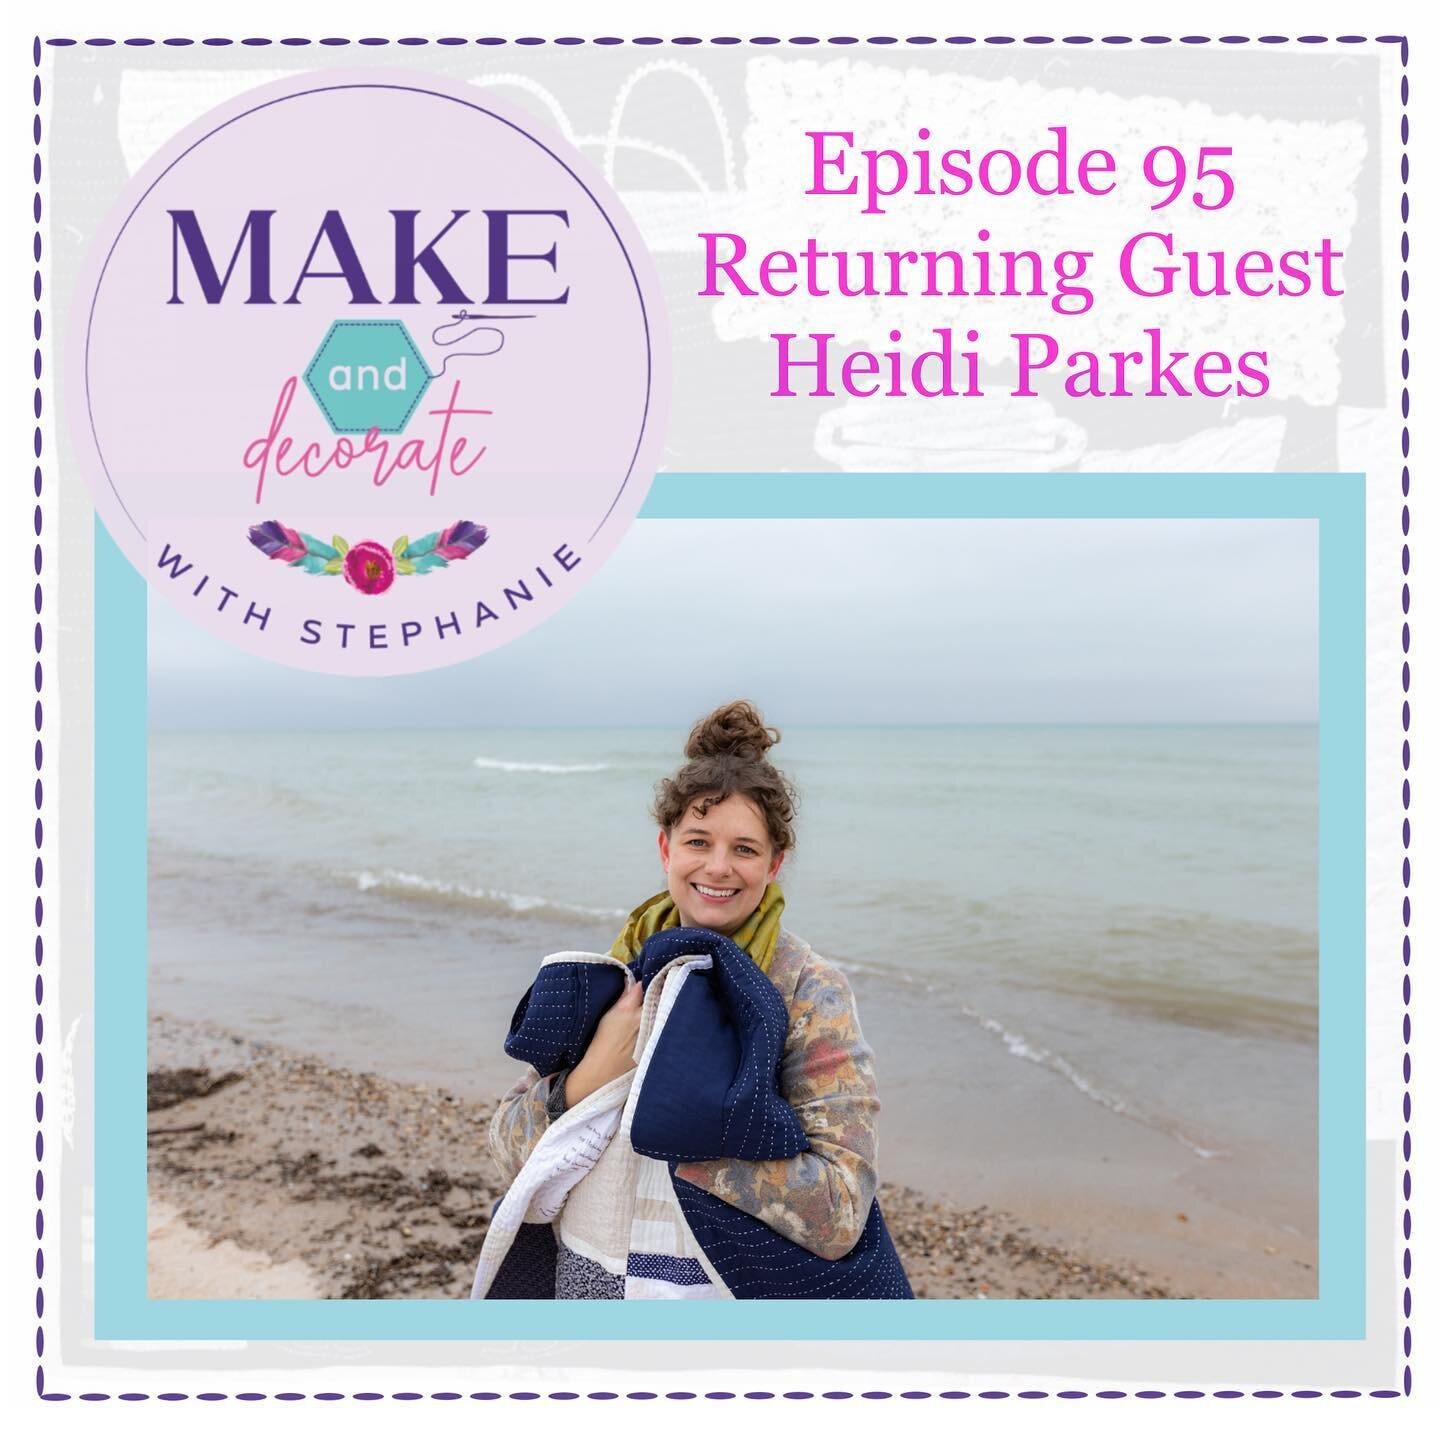 On this episode I welcome back Heidi Parkes to the show. &nbsp; Heidi is known for hand quilting, art quilts and diary quilting as well as hand yoga.&nbsp; We continue our conversation and catch up on all the fun and exciting things that Heidi has be